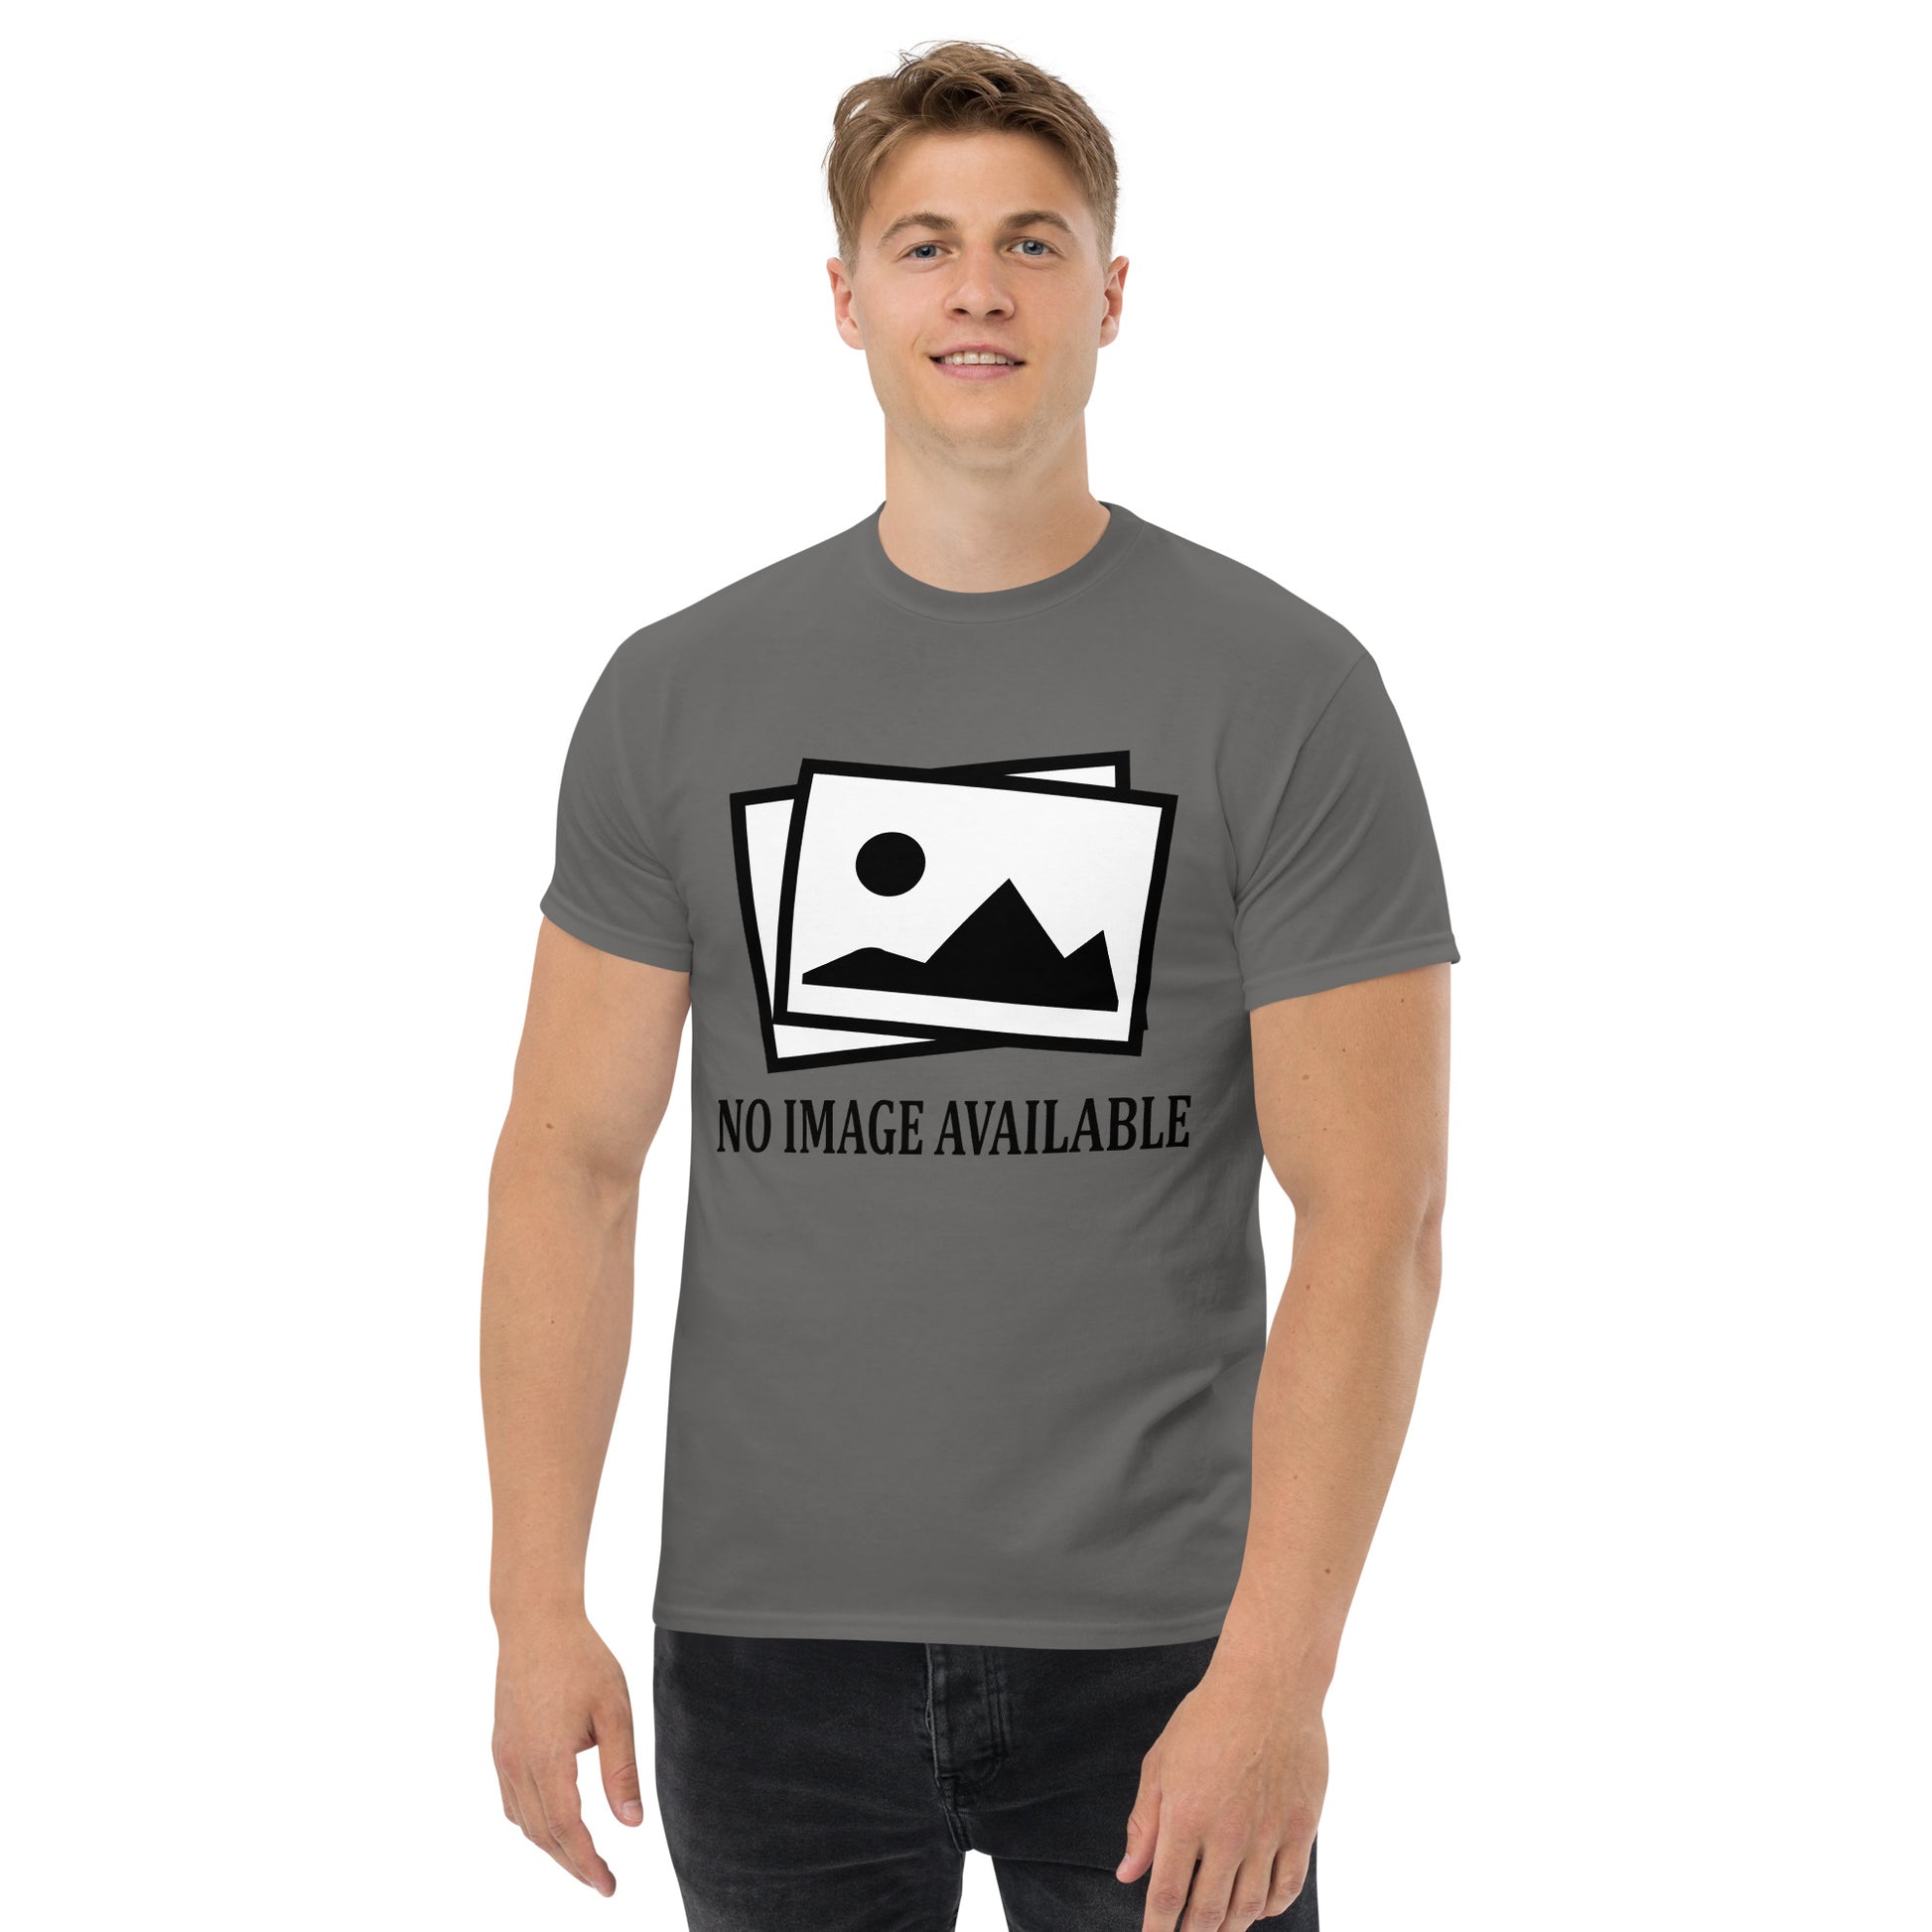 Men with grey t-shirt with image and text "no image available"